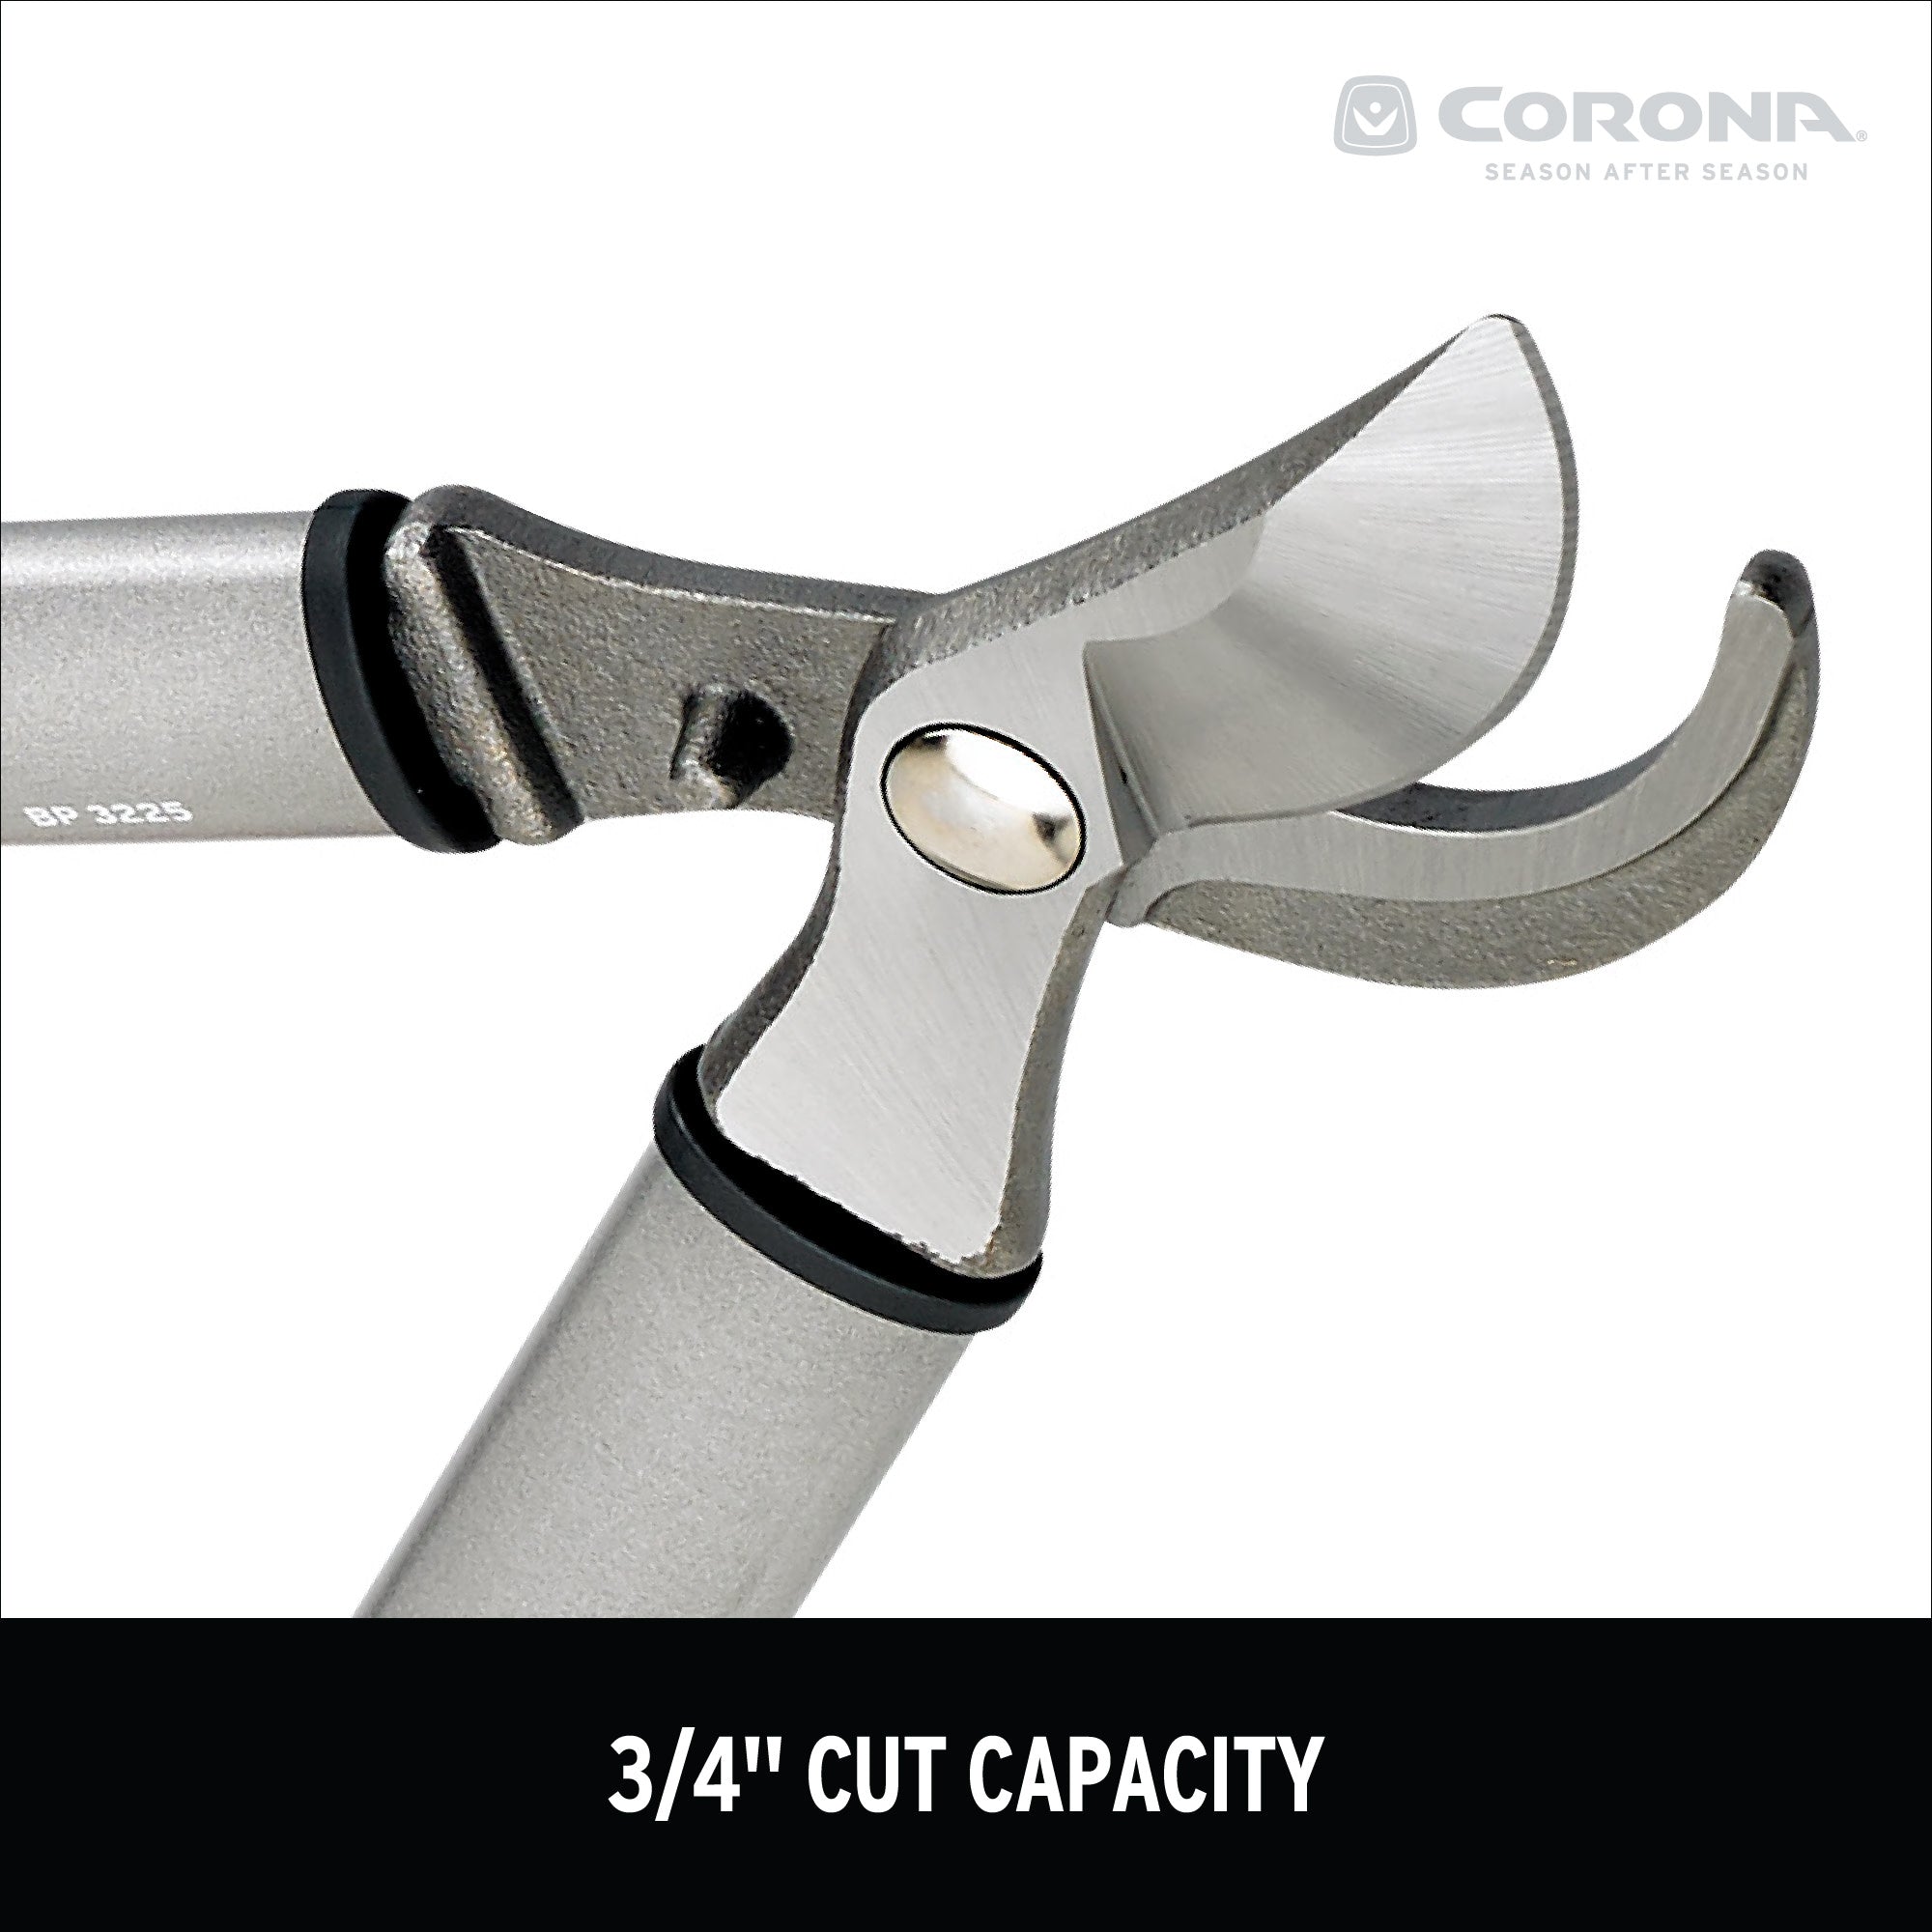 ClassicCUT® Two-Handed Pruner, 3/4 in. Cut Capacity